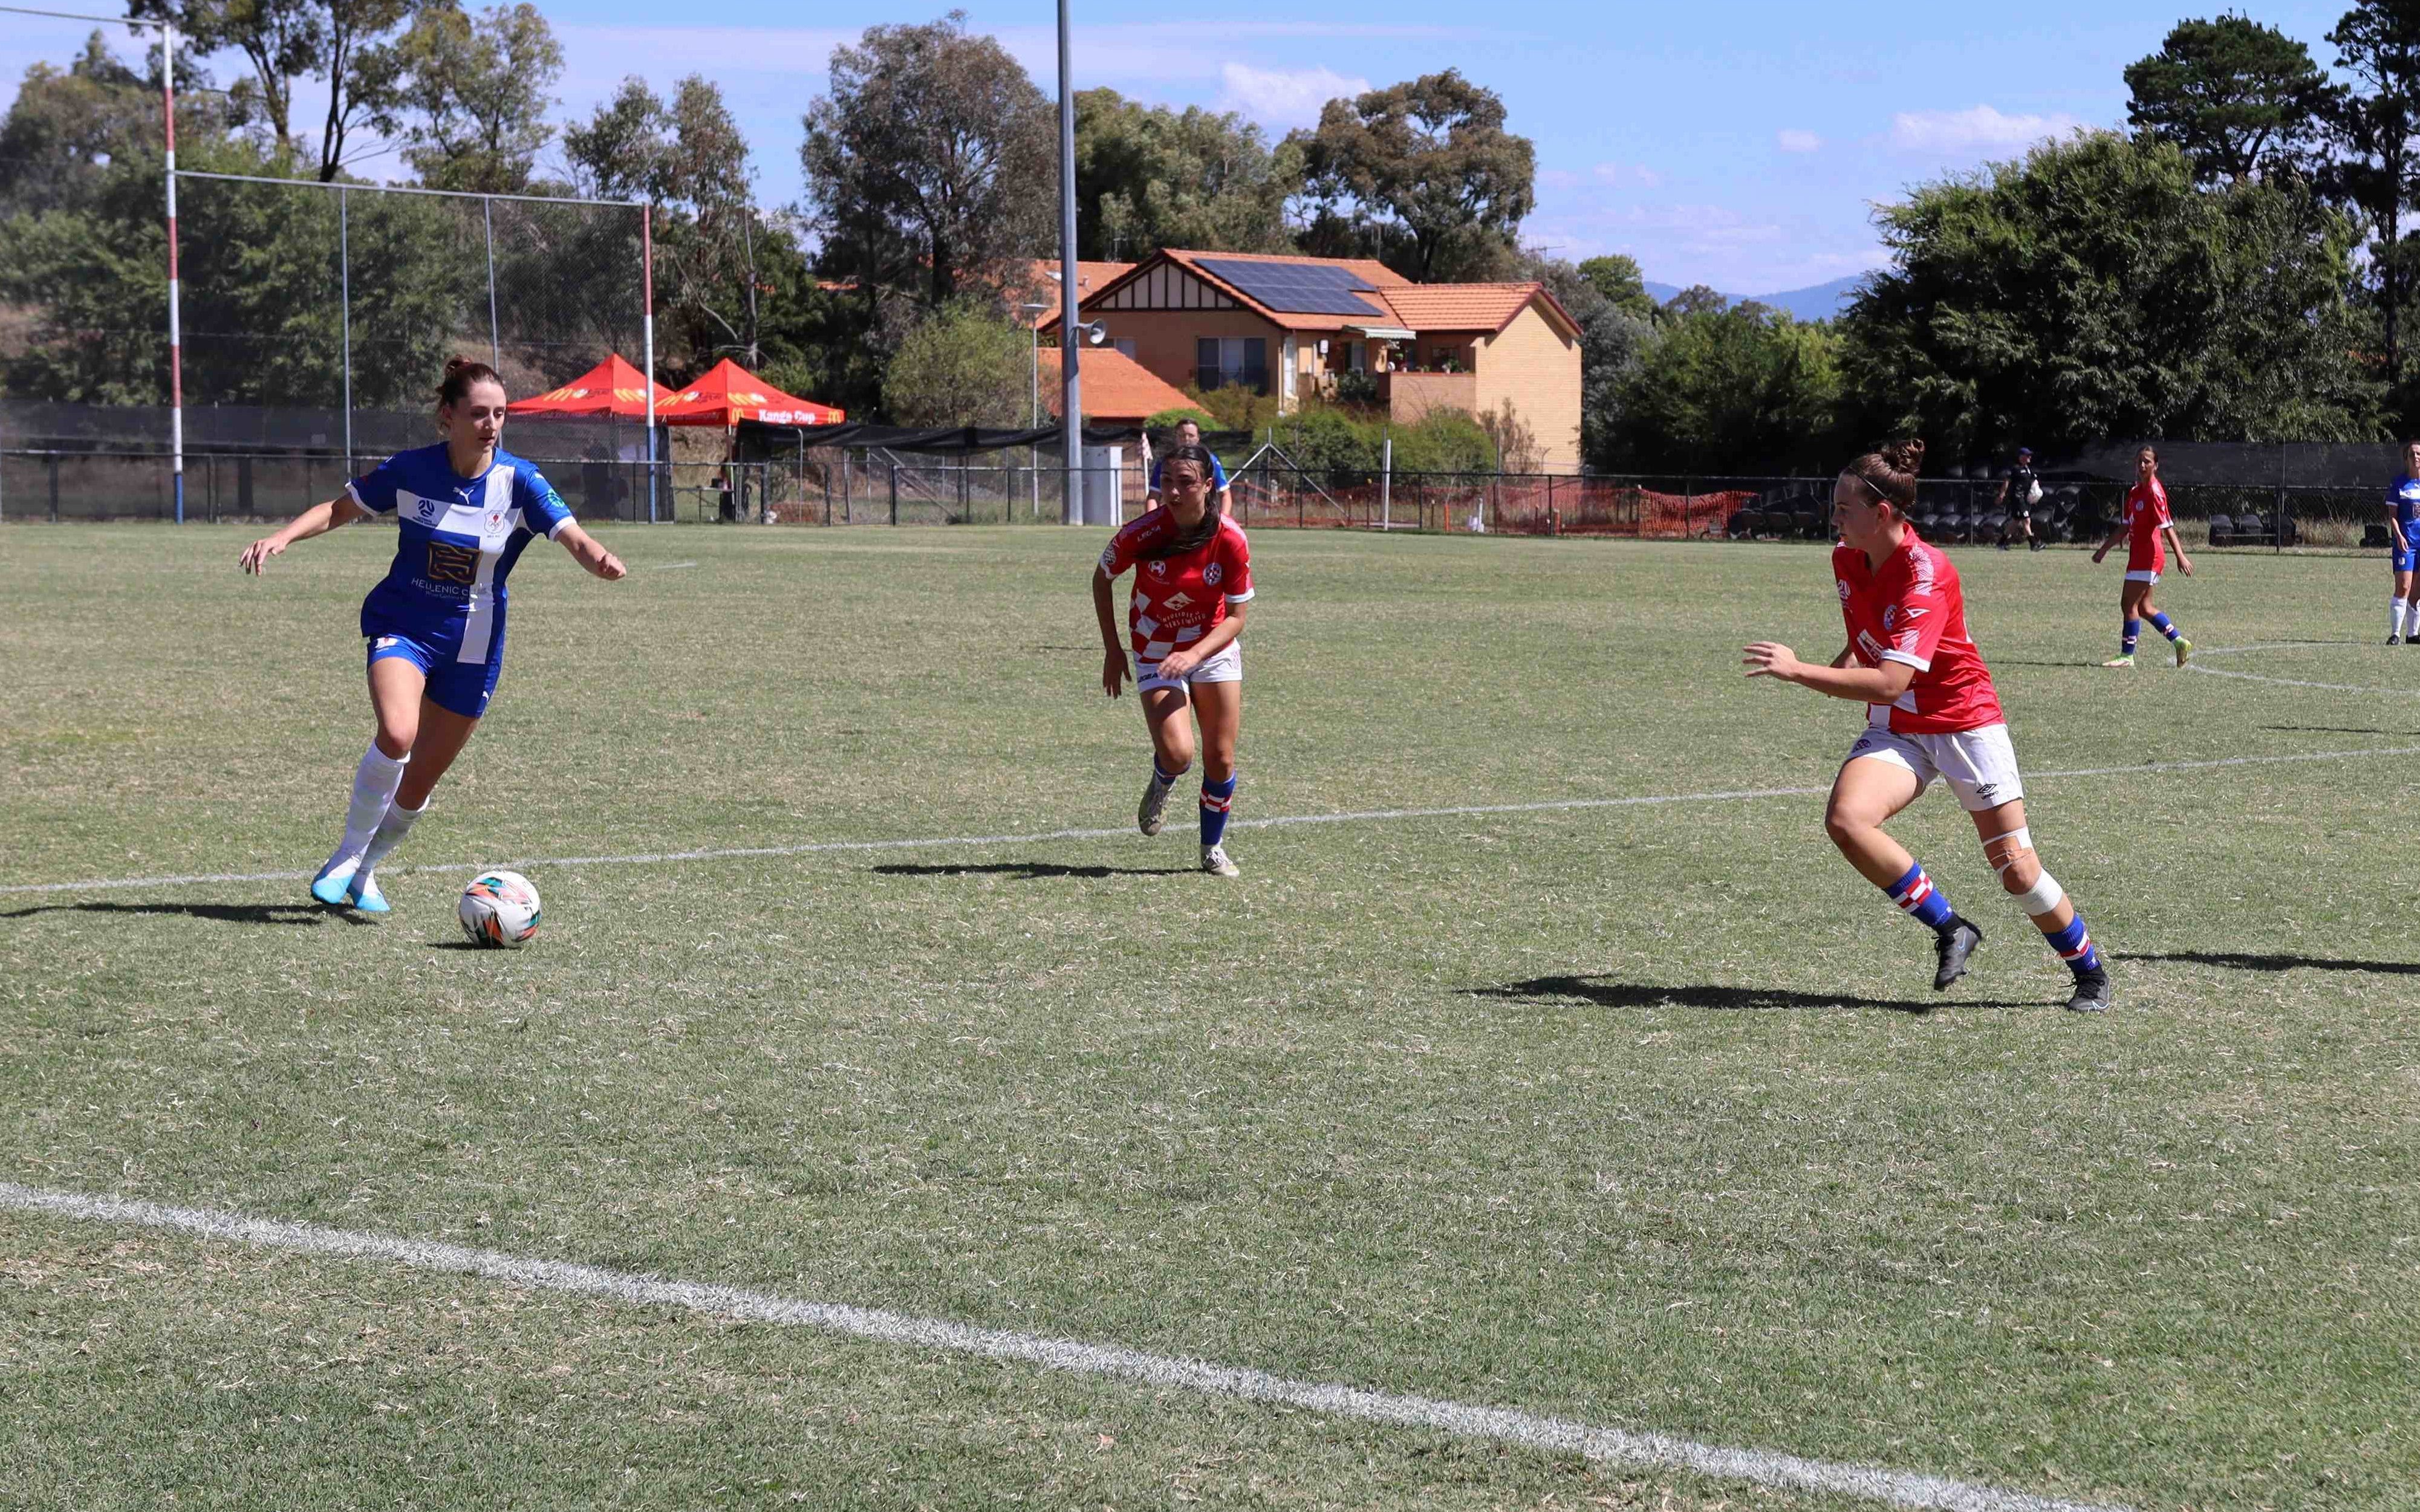 League champions Canberra Olympic facing off against Canberra Croatia in the annual Charity Shield